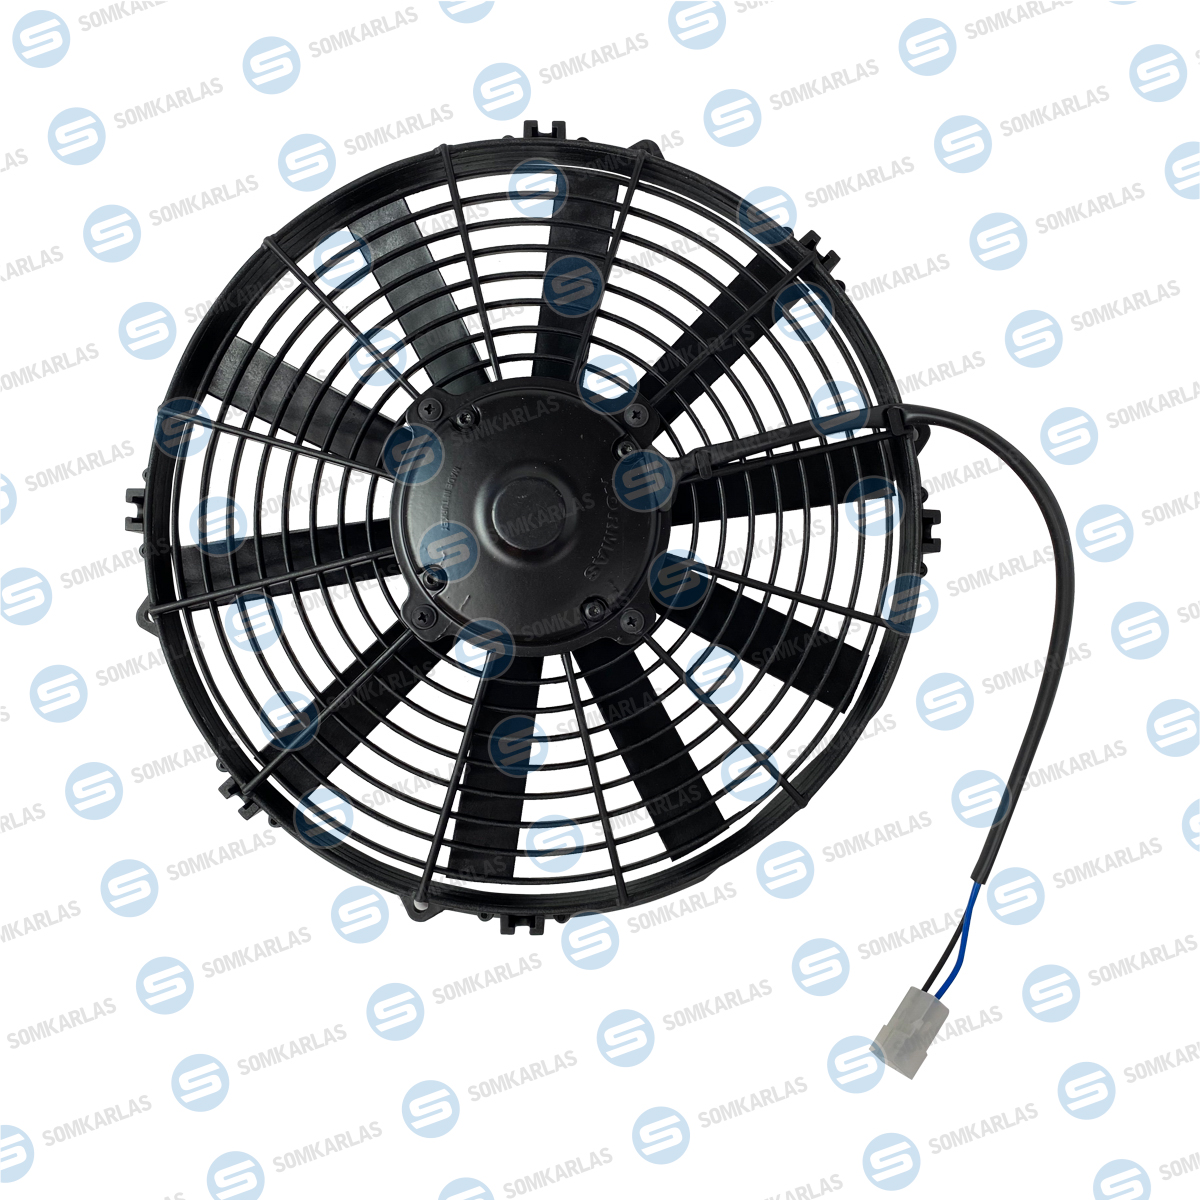 MIX10103 - AXIEL FAN FOR OIL COOLER 12